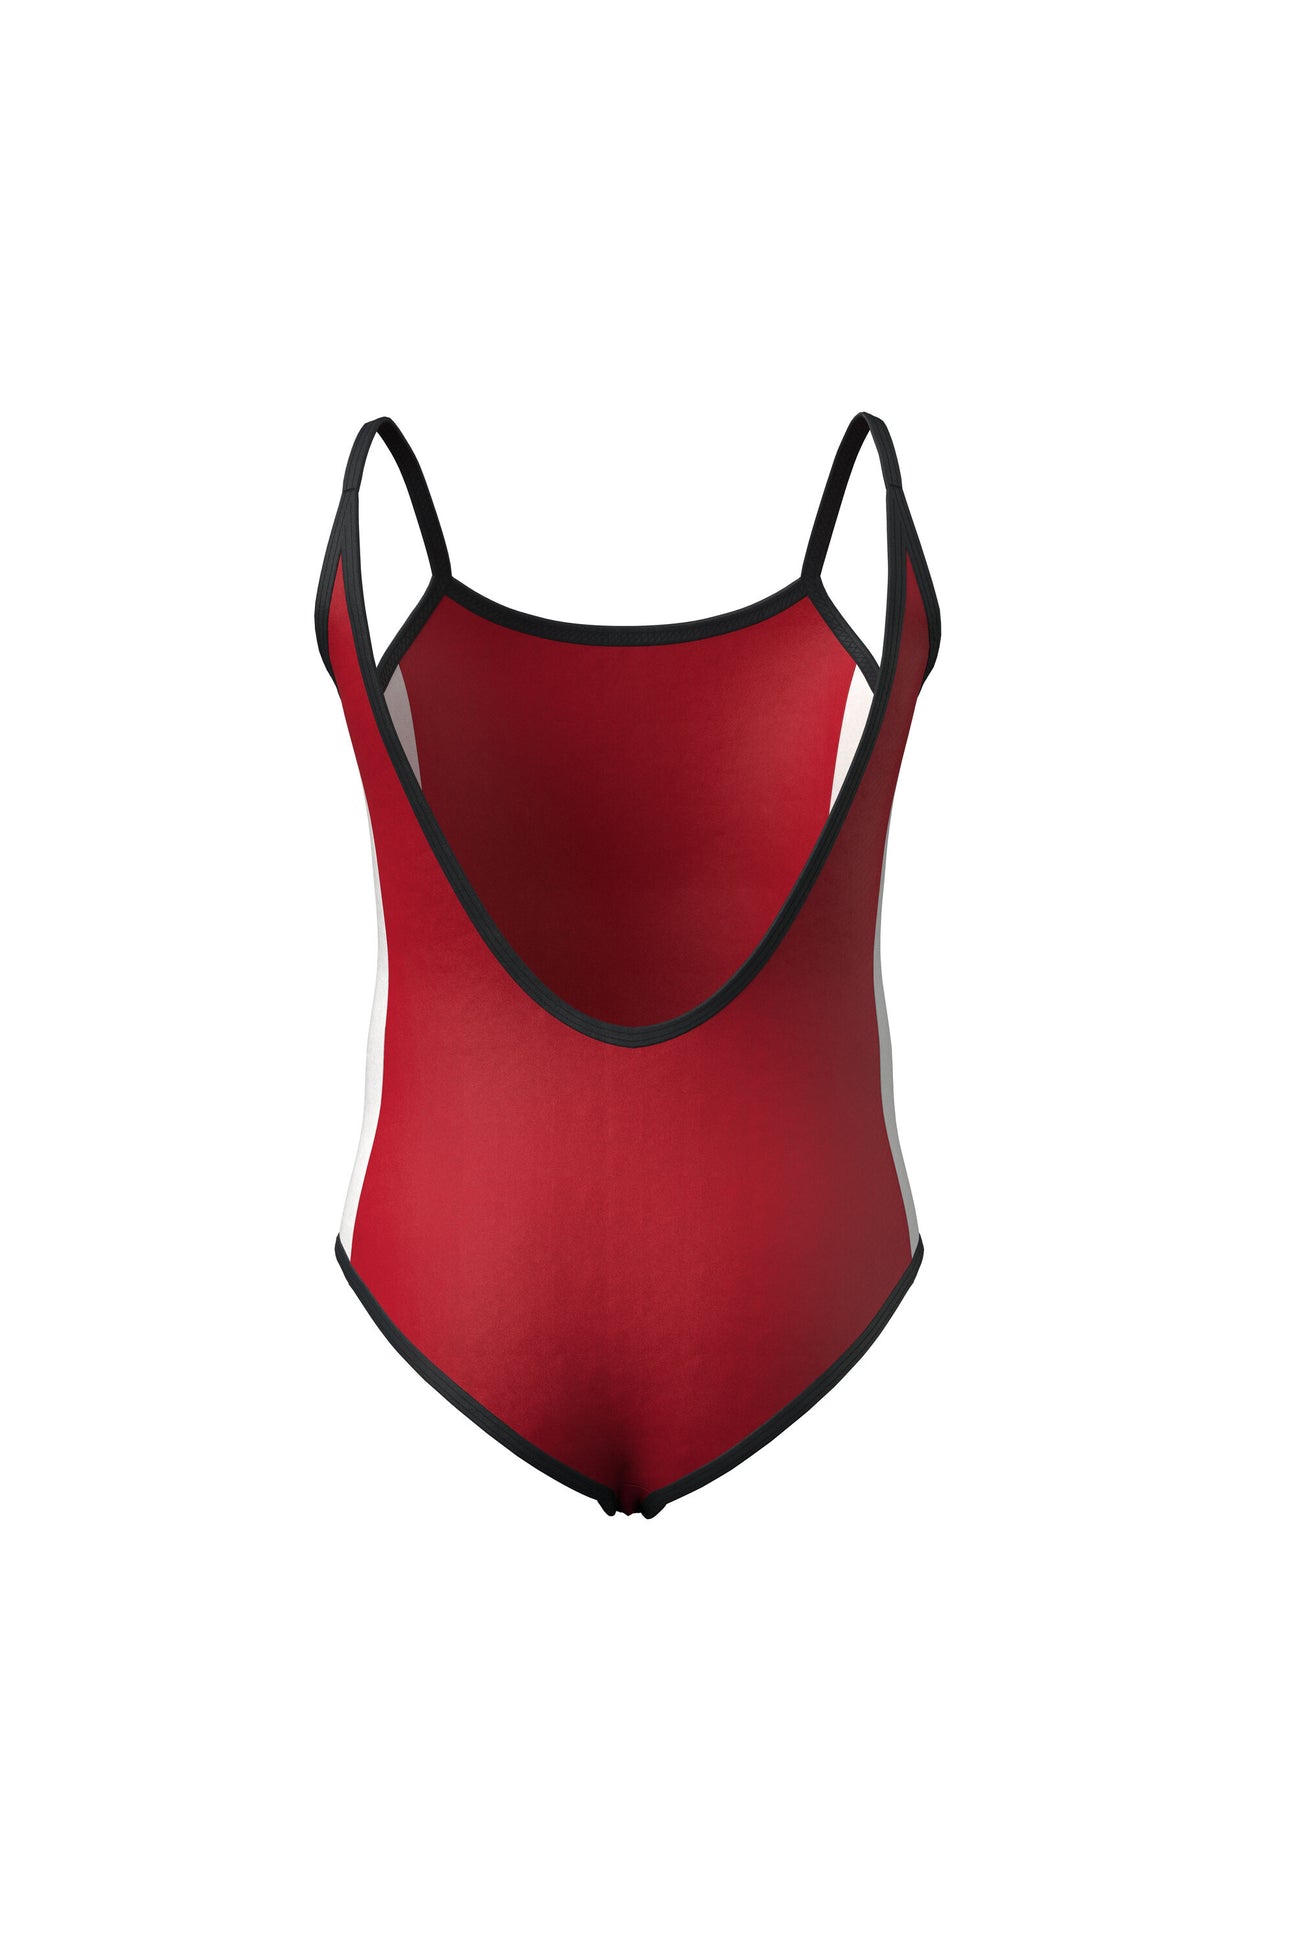 Red lycra one-piece swimsuit with logo Red lycra one-piece swimsuit with logo